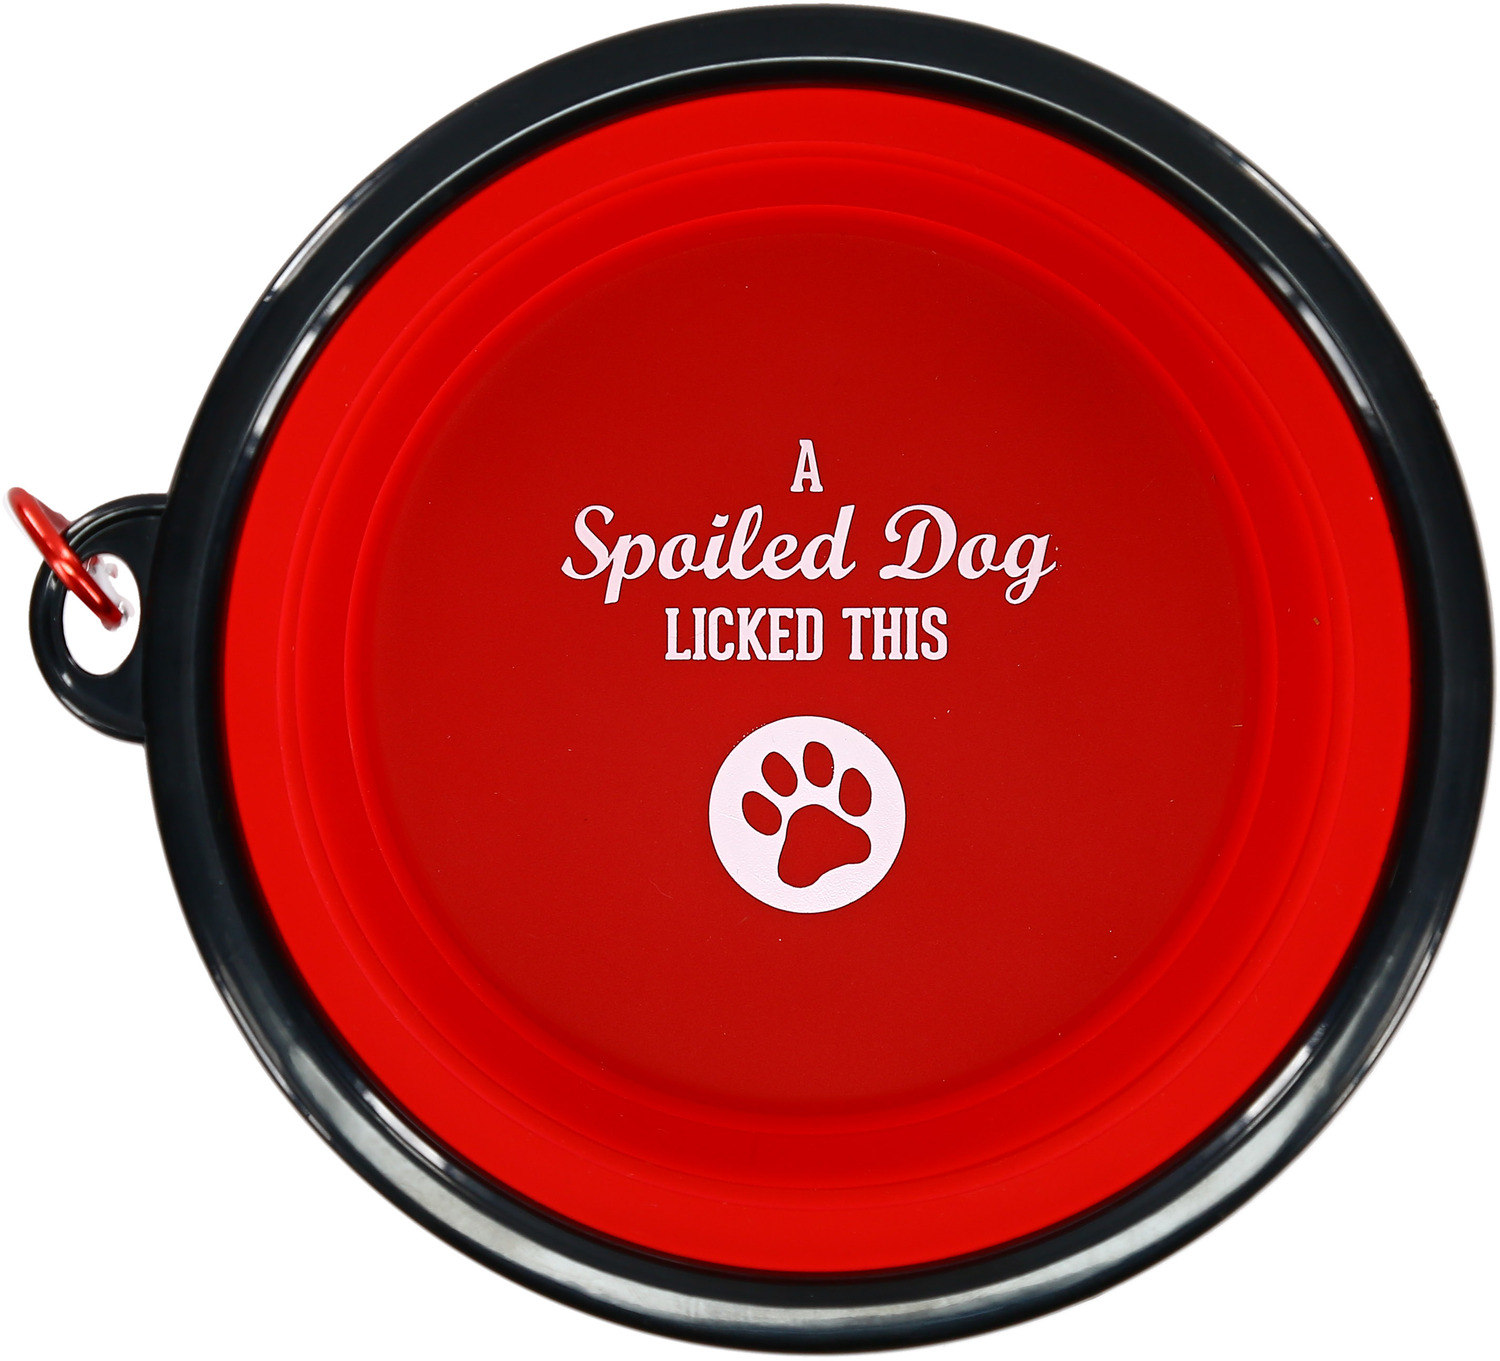 Spoiled Dog by We Pets - Spoiled Dog - 7" Collapsible Silicone Pet Bowl